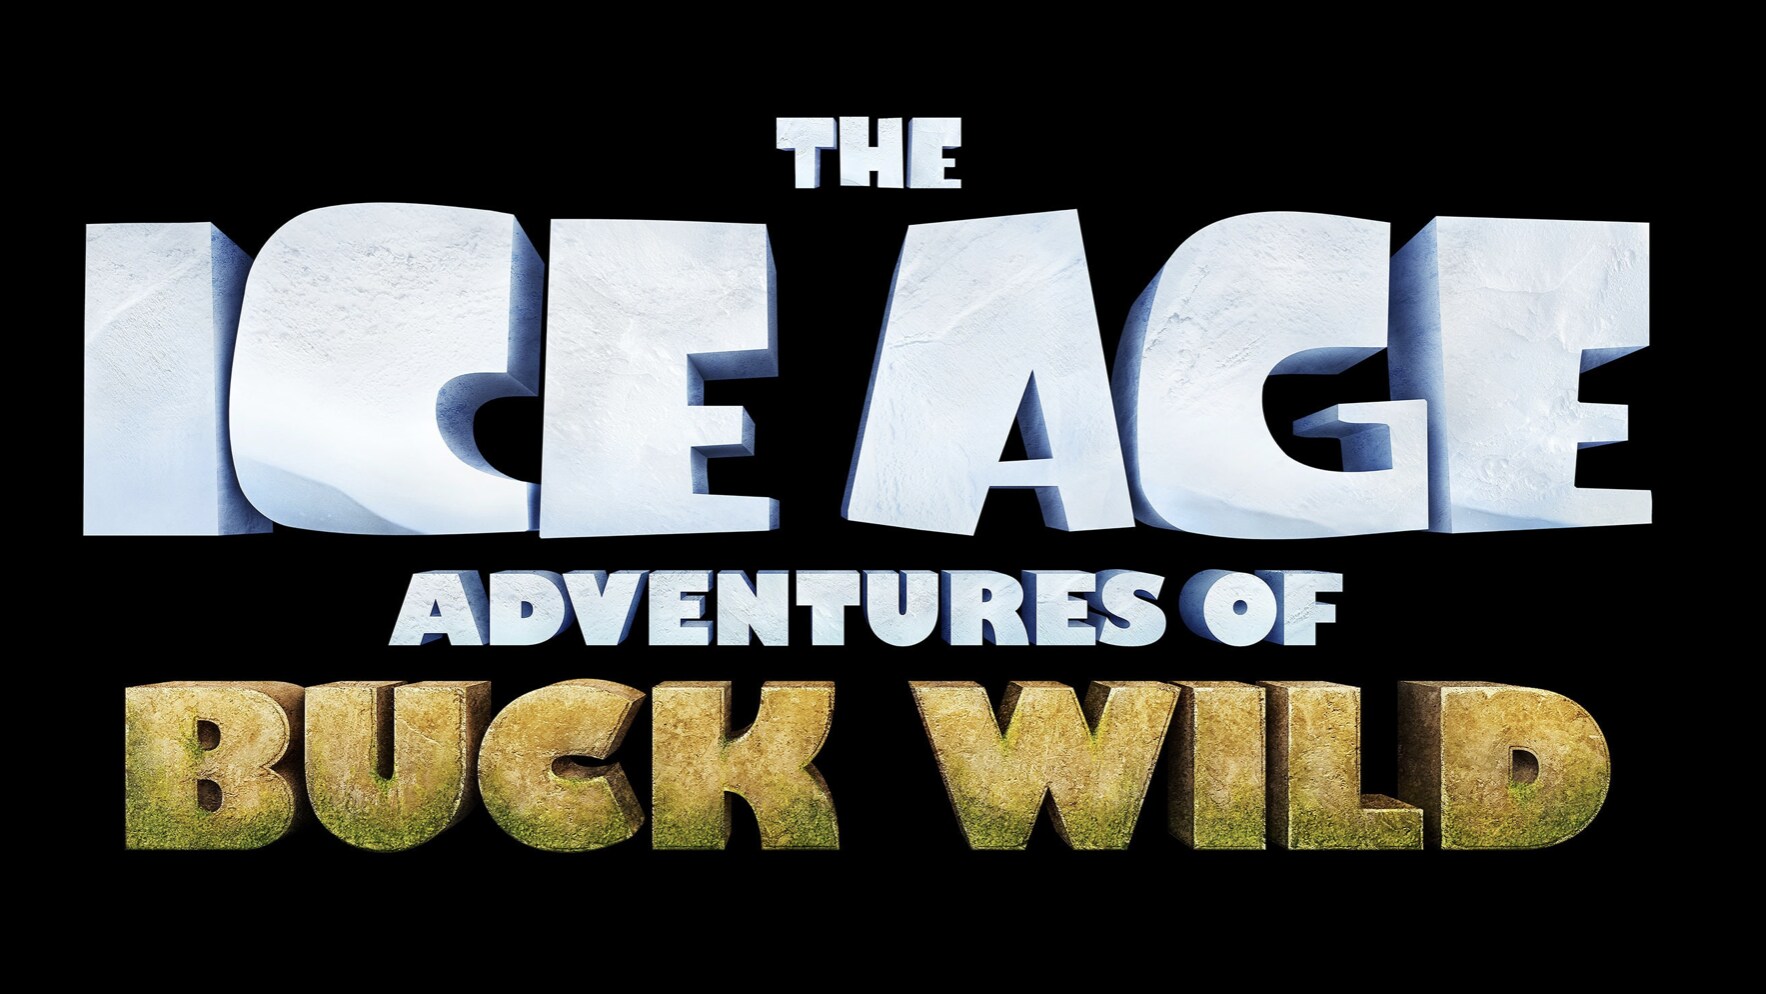 ICE AGE’S BUCK WILD AND FRIENDS CRASH INTO THE STREETS OF LONDON